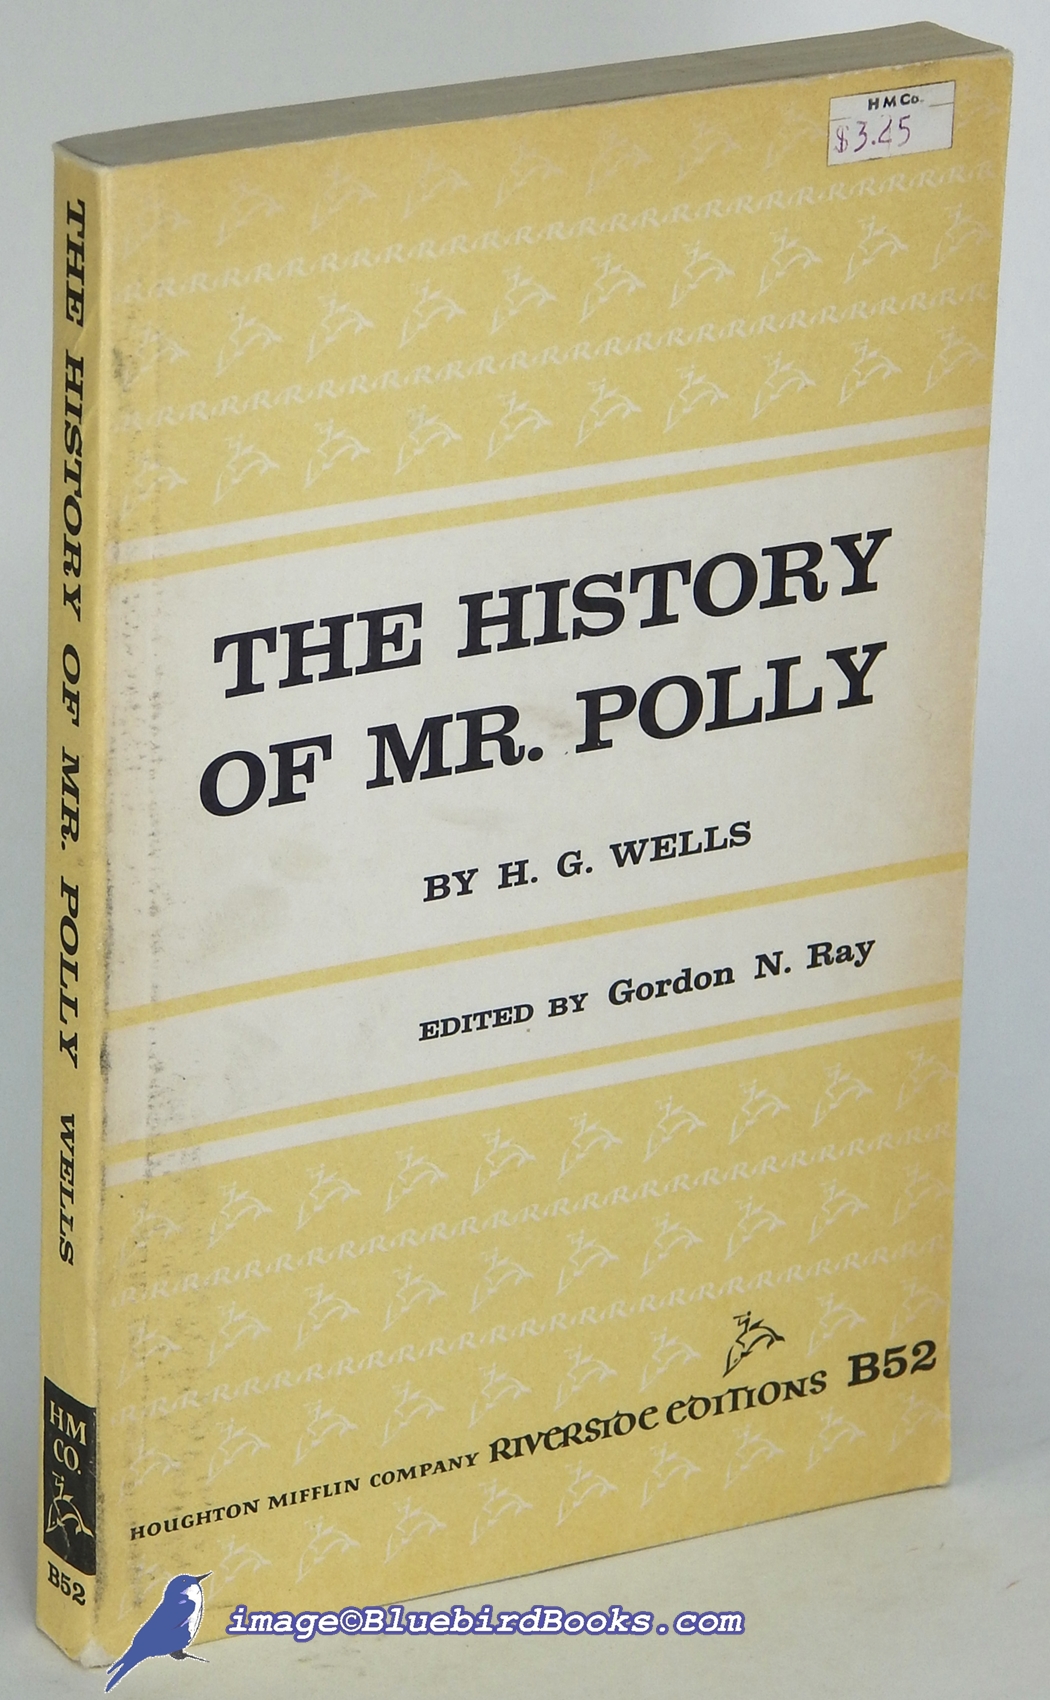 WELLS, H. G. - The History of Mr. Polly